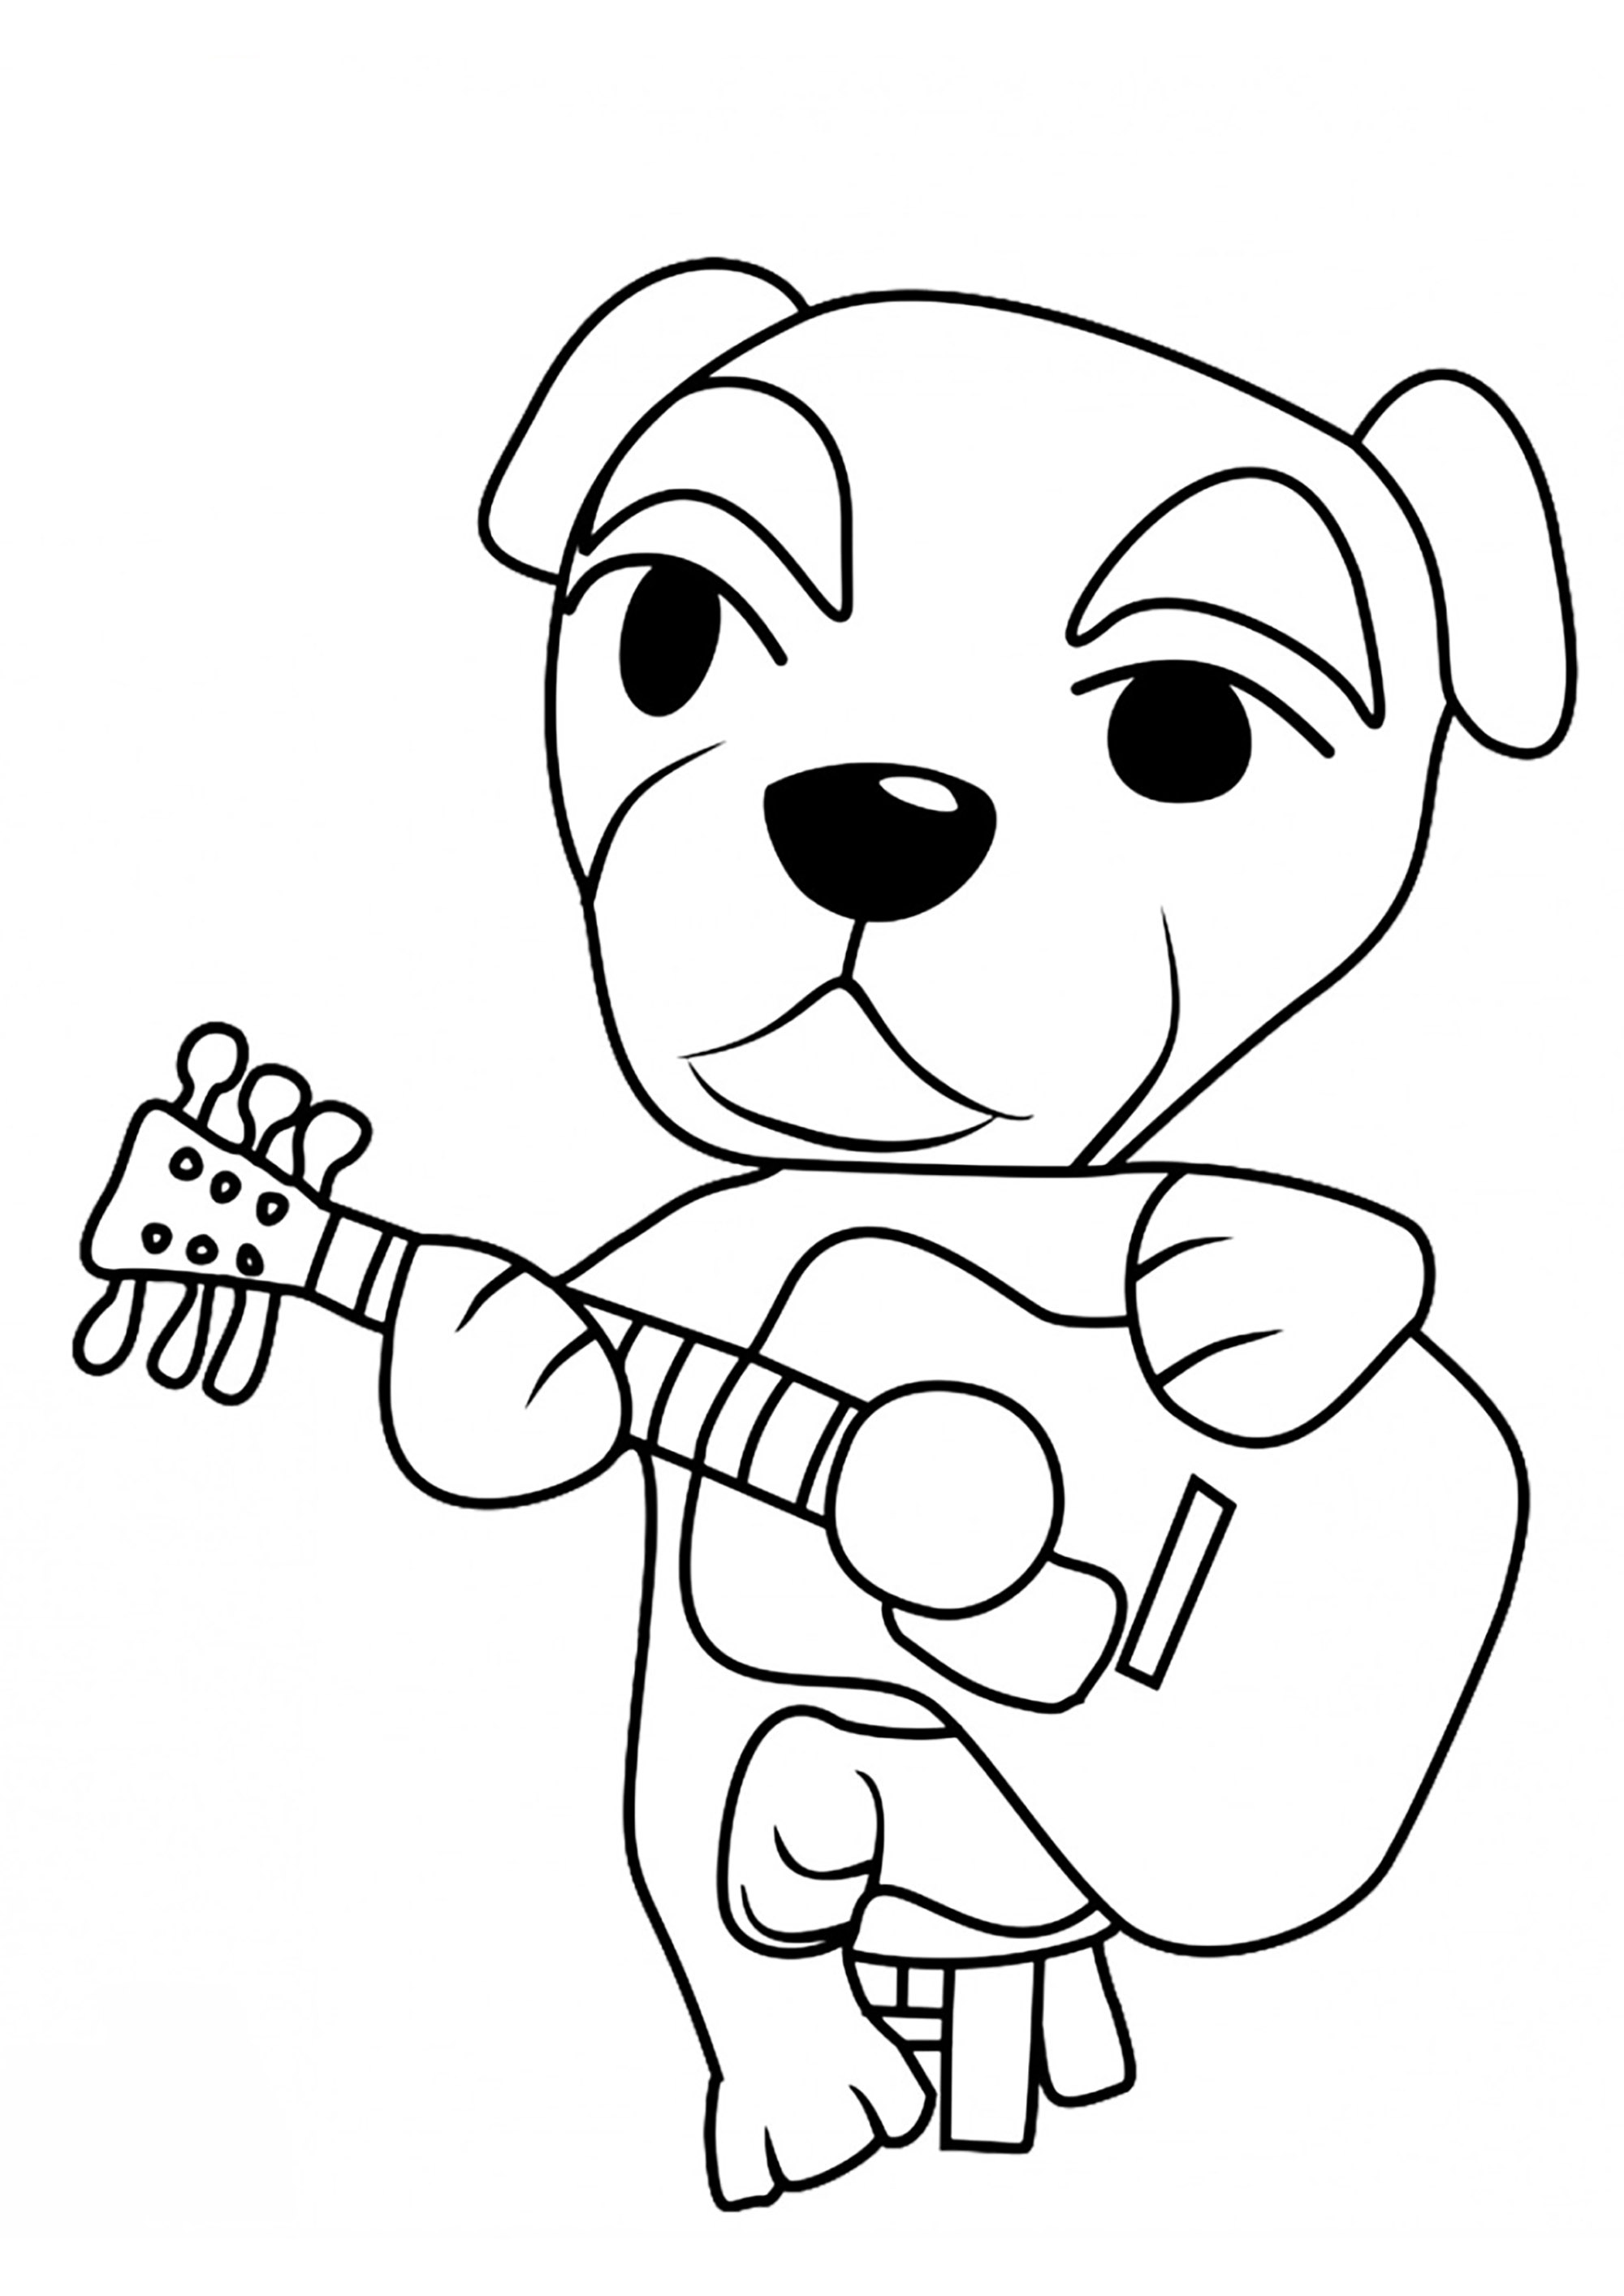 Funny Animal Crossing coloring page for kids